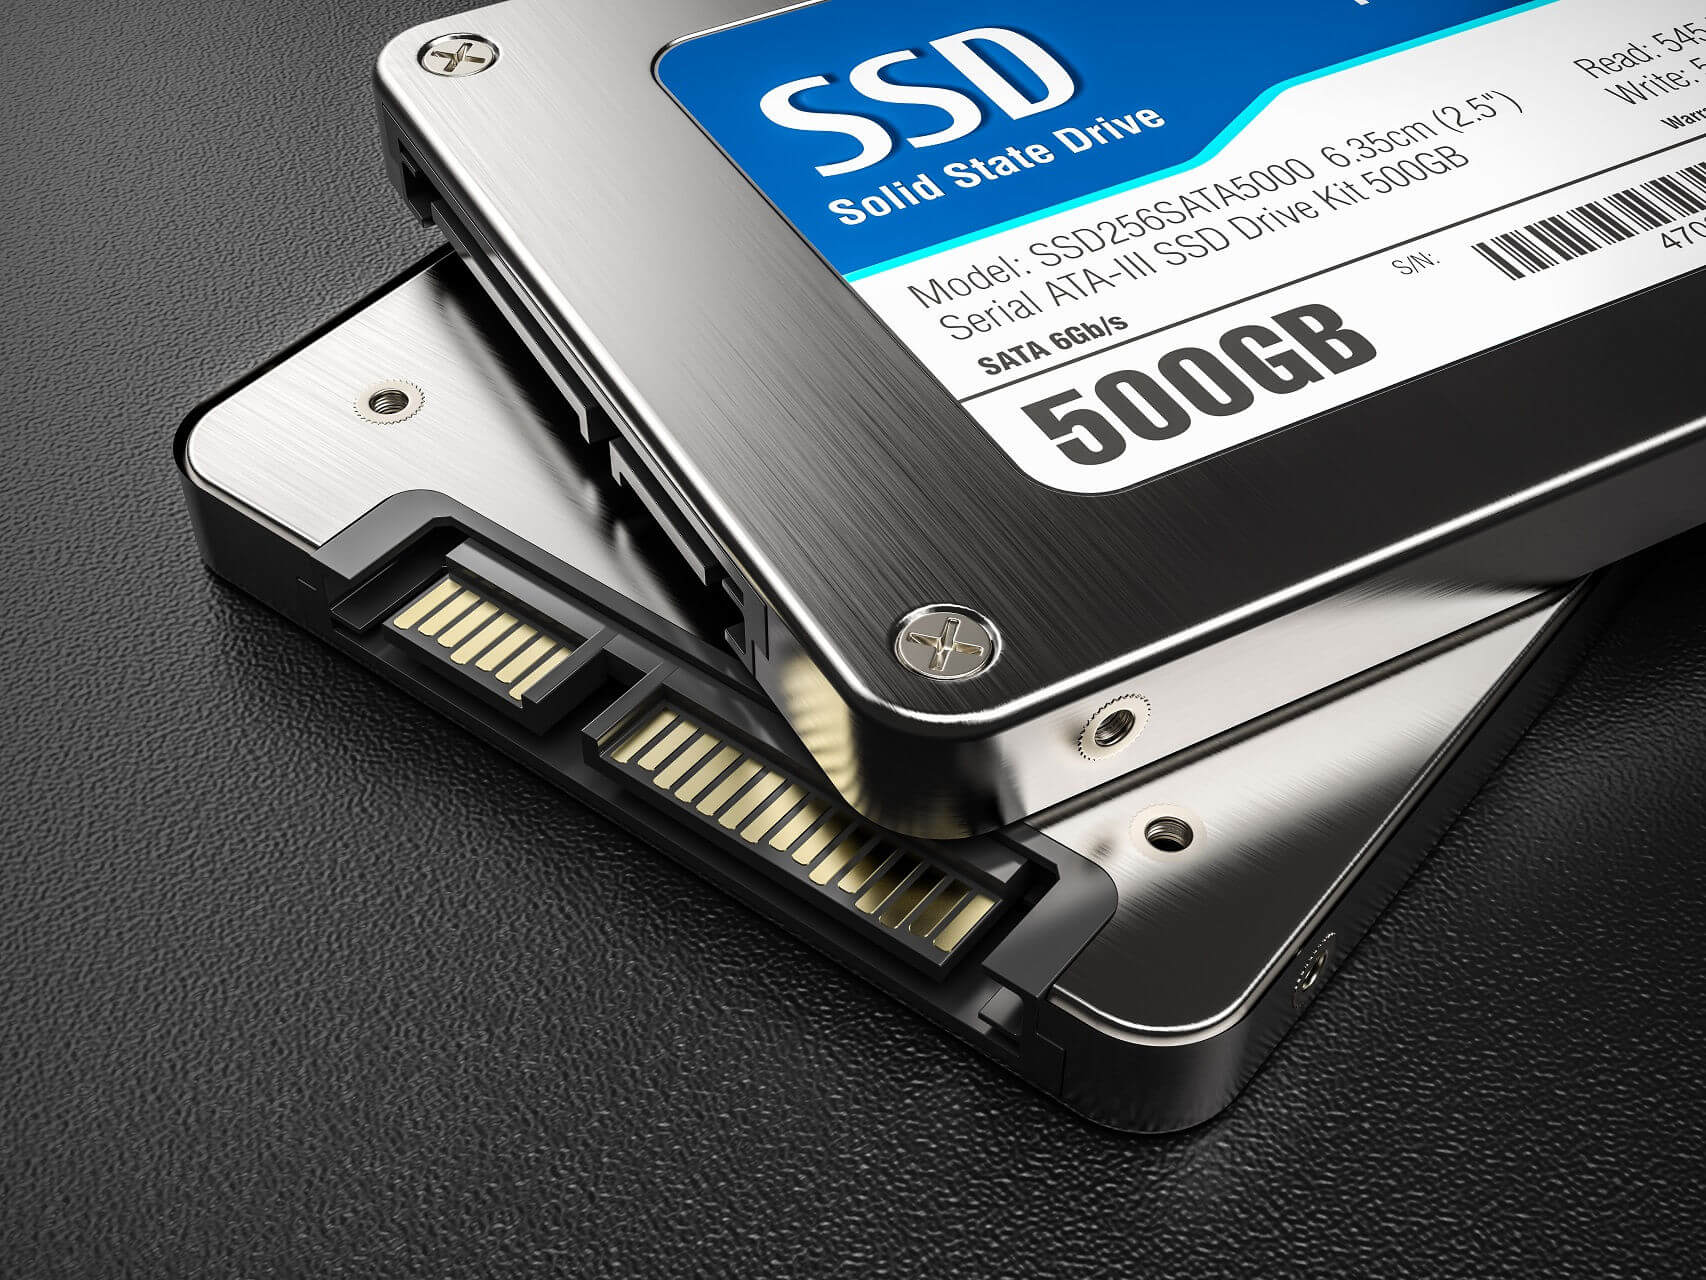 Windows 10 version 2004 defrags your SSD over and over again